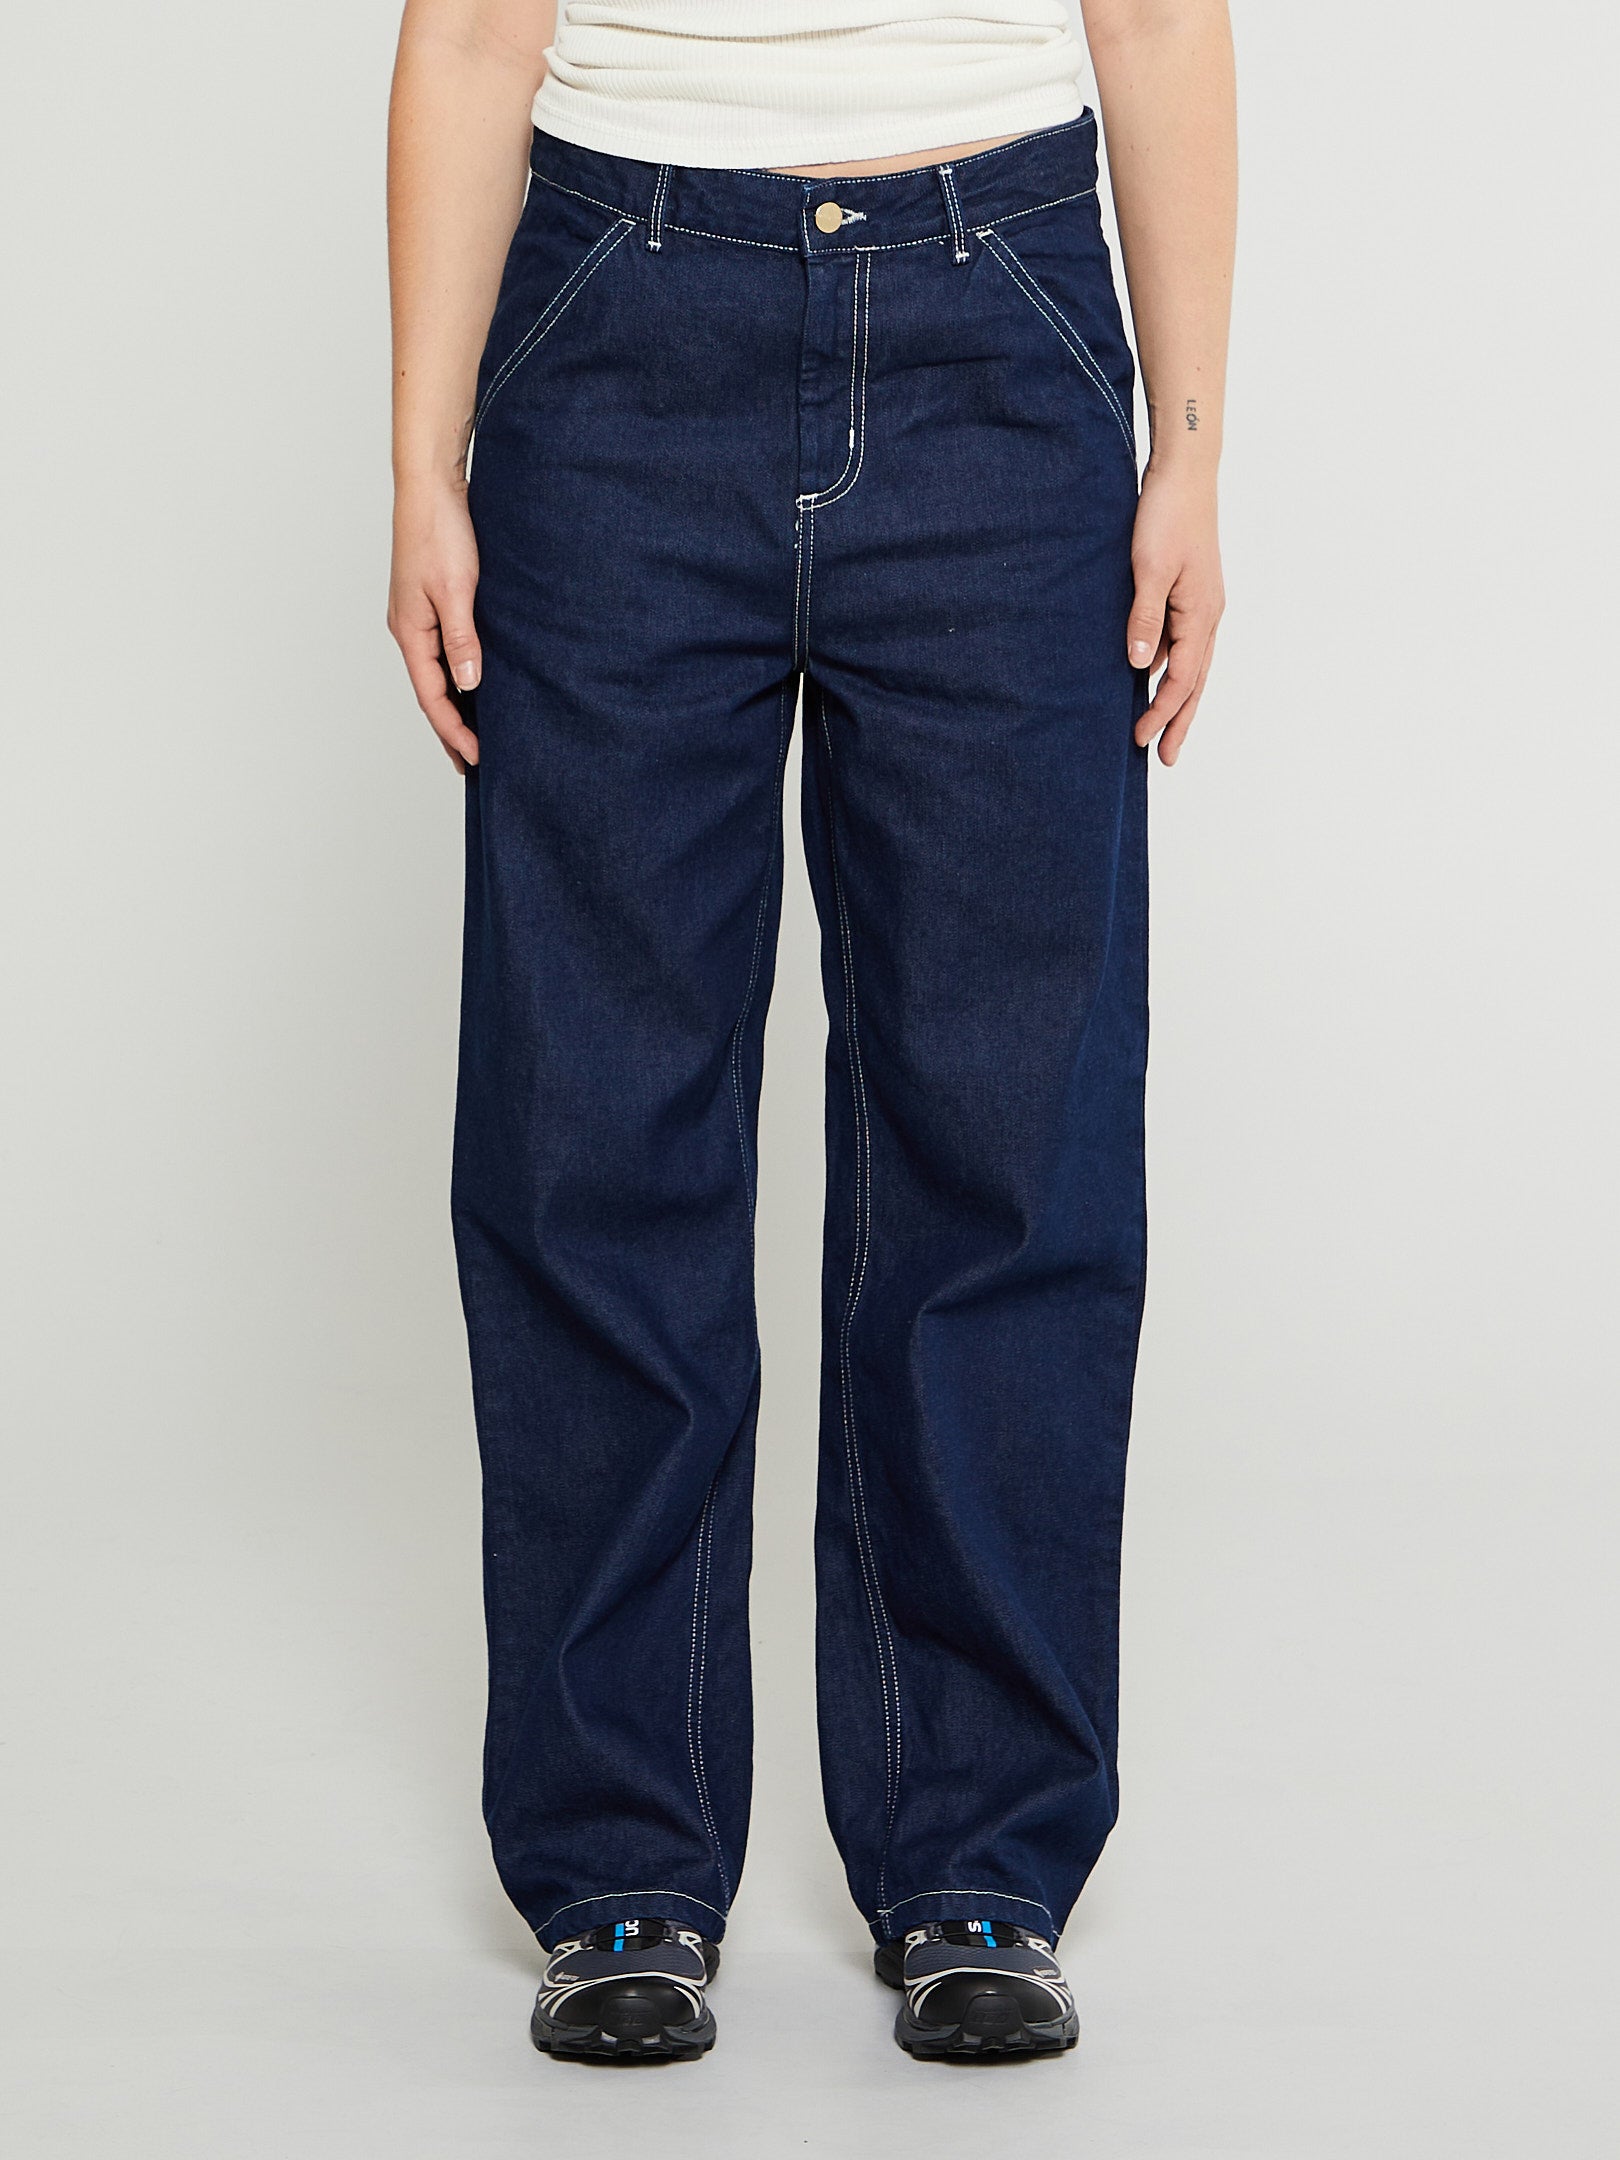 CARHARTT - W' Simple Pant in Blue One Wash